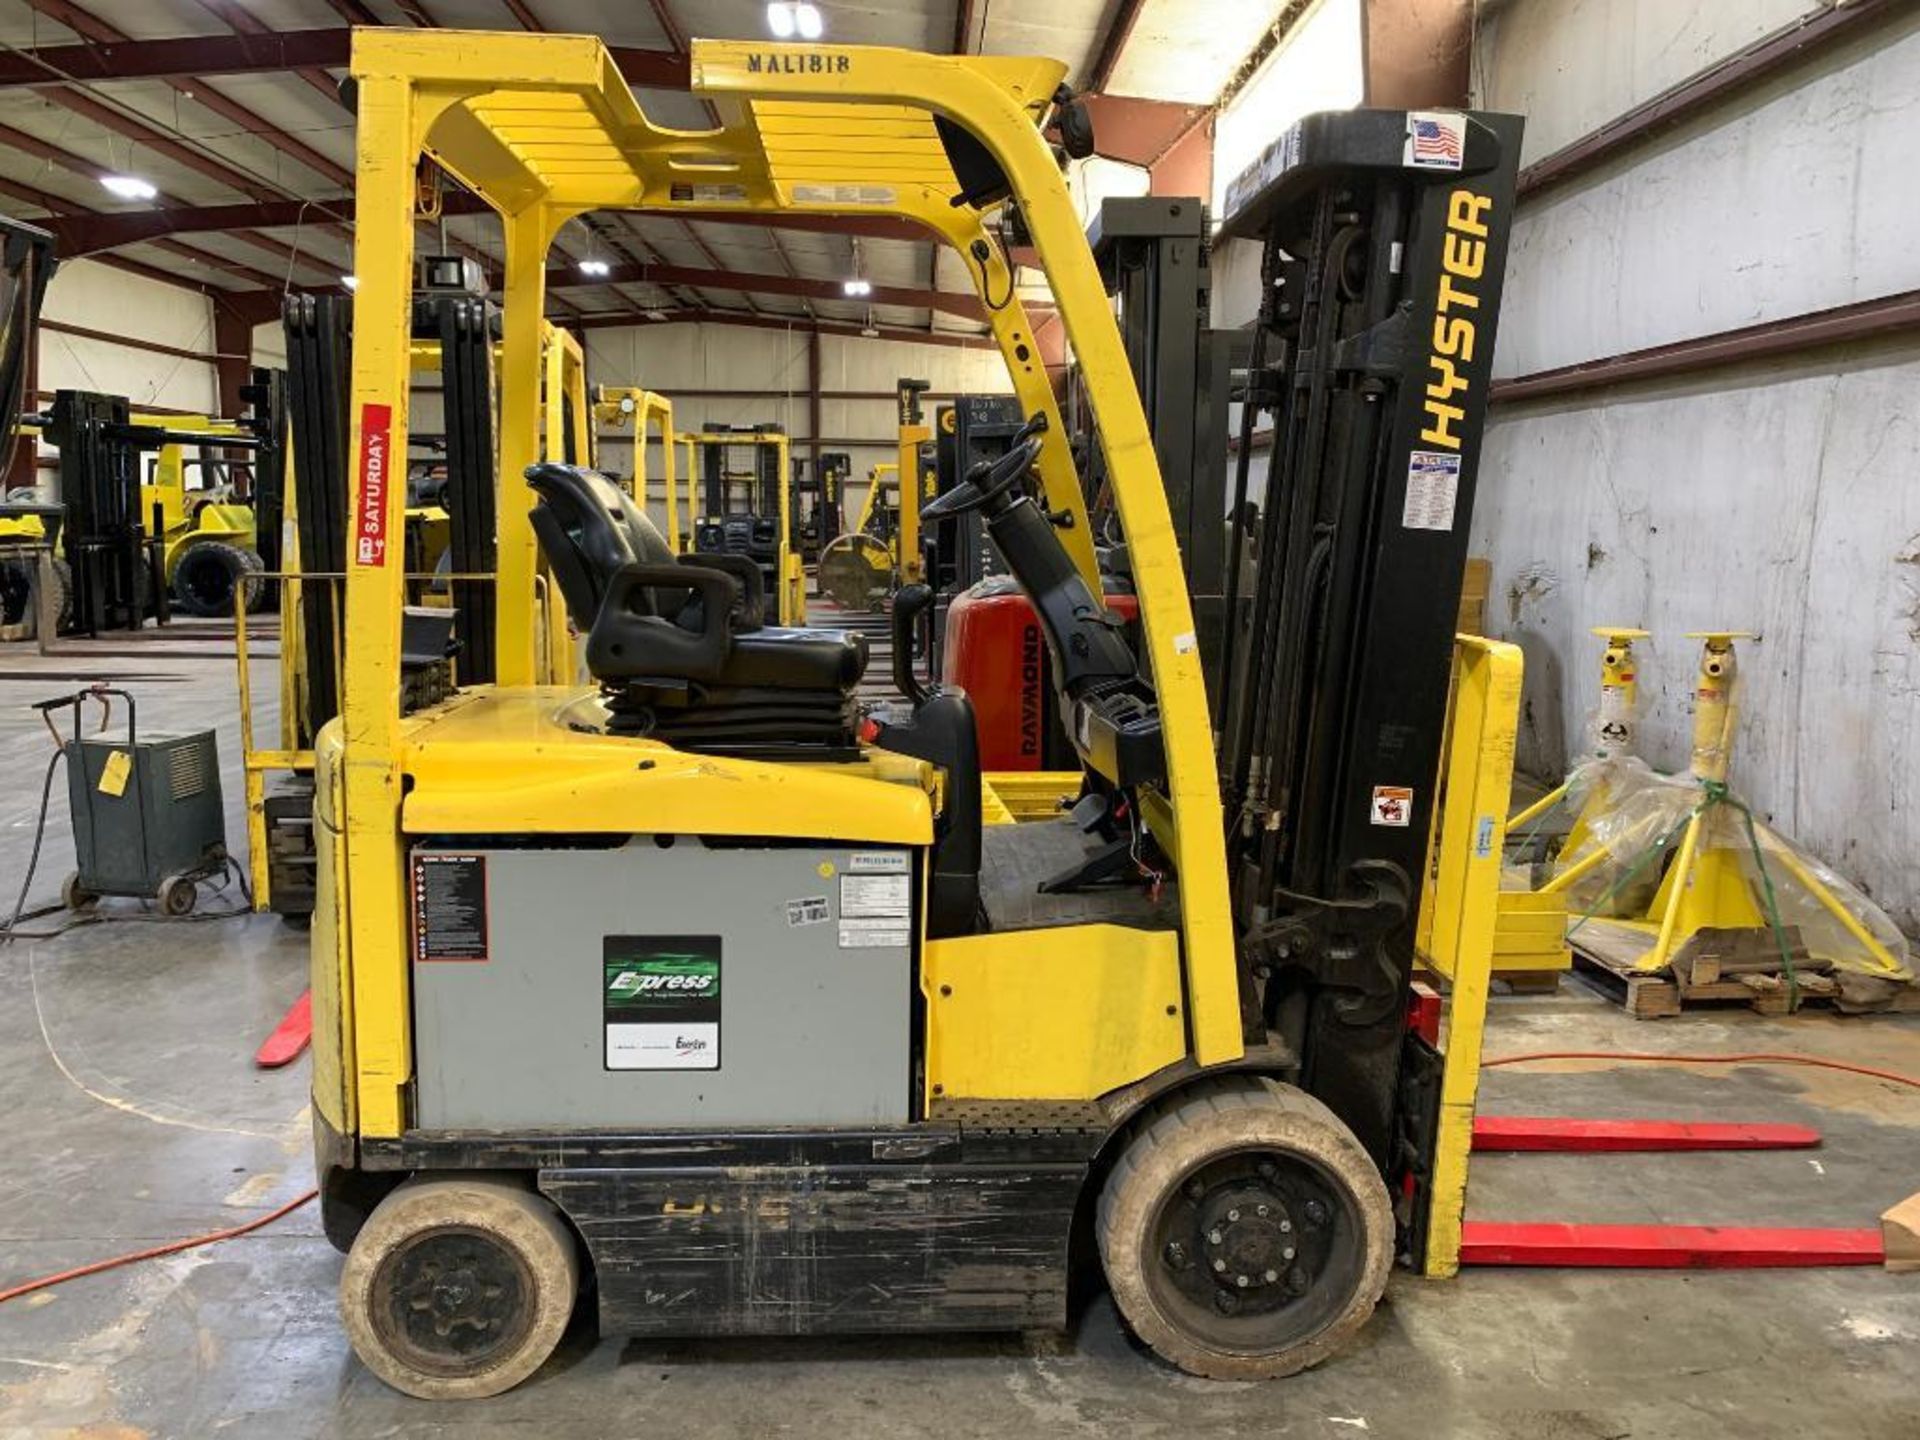 2018 Hyster 5,000 lb. capacity forklift, model e50xn, s/n a268n25355s, 36-volt electric w/ battery,